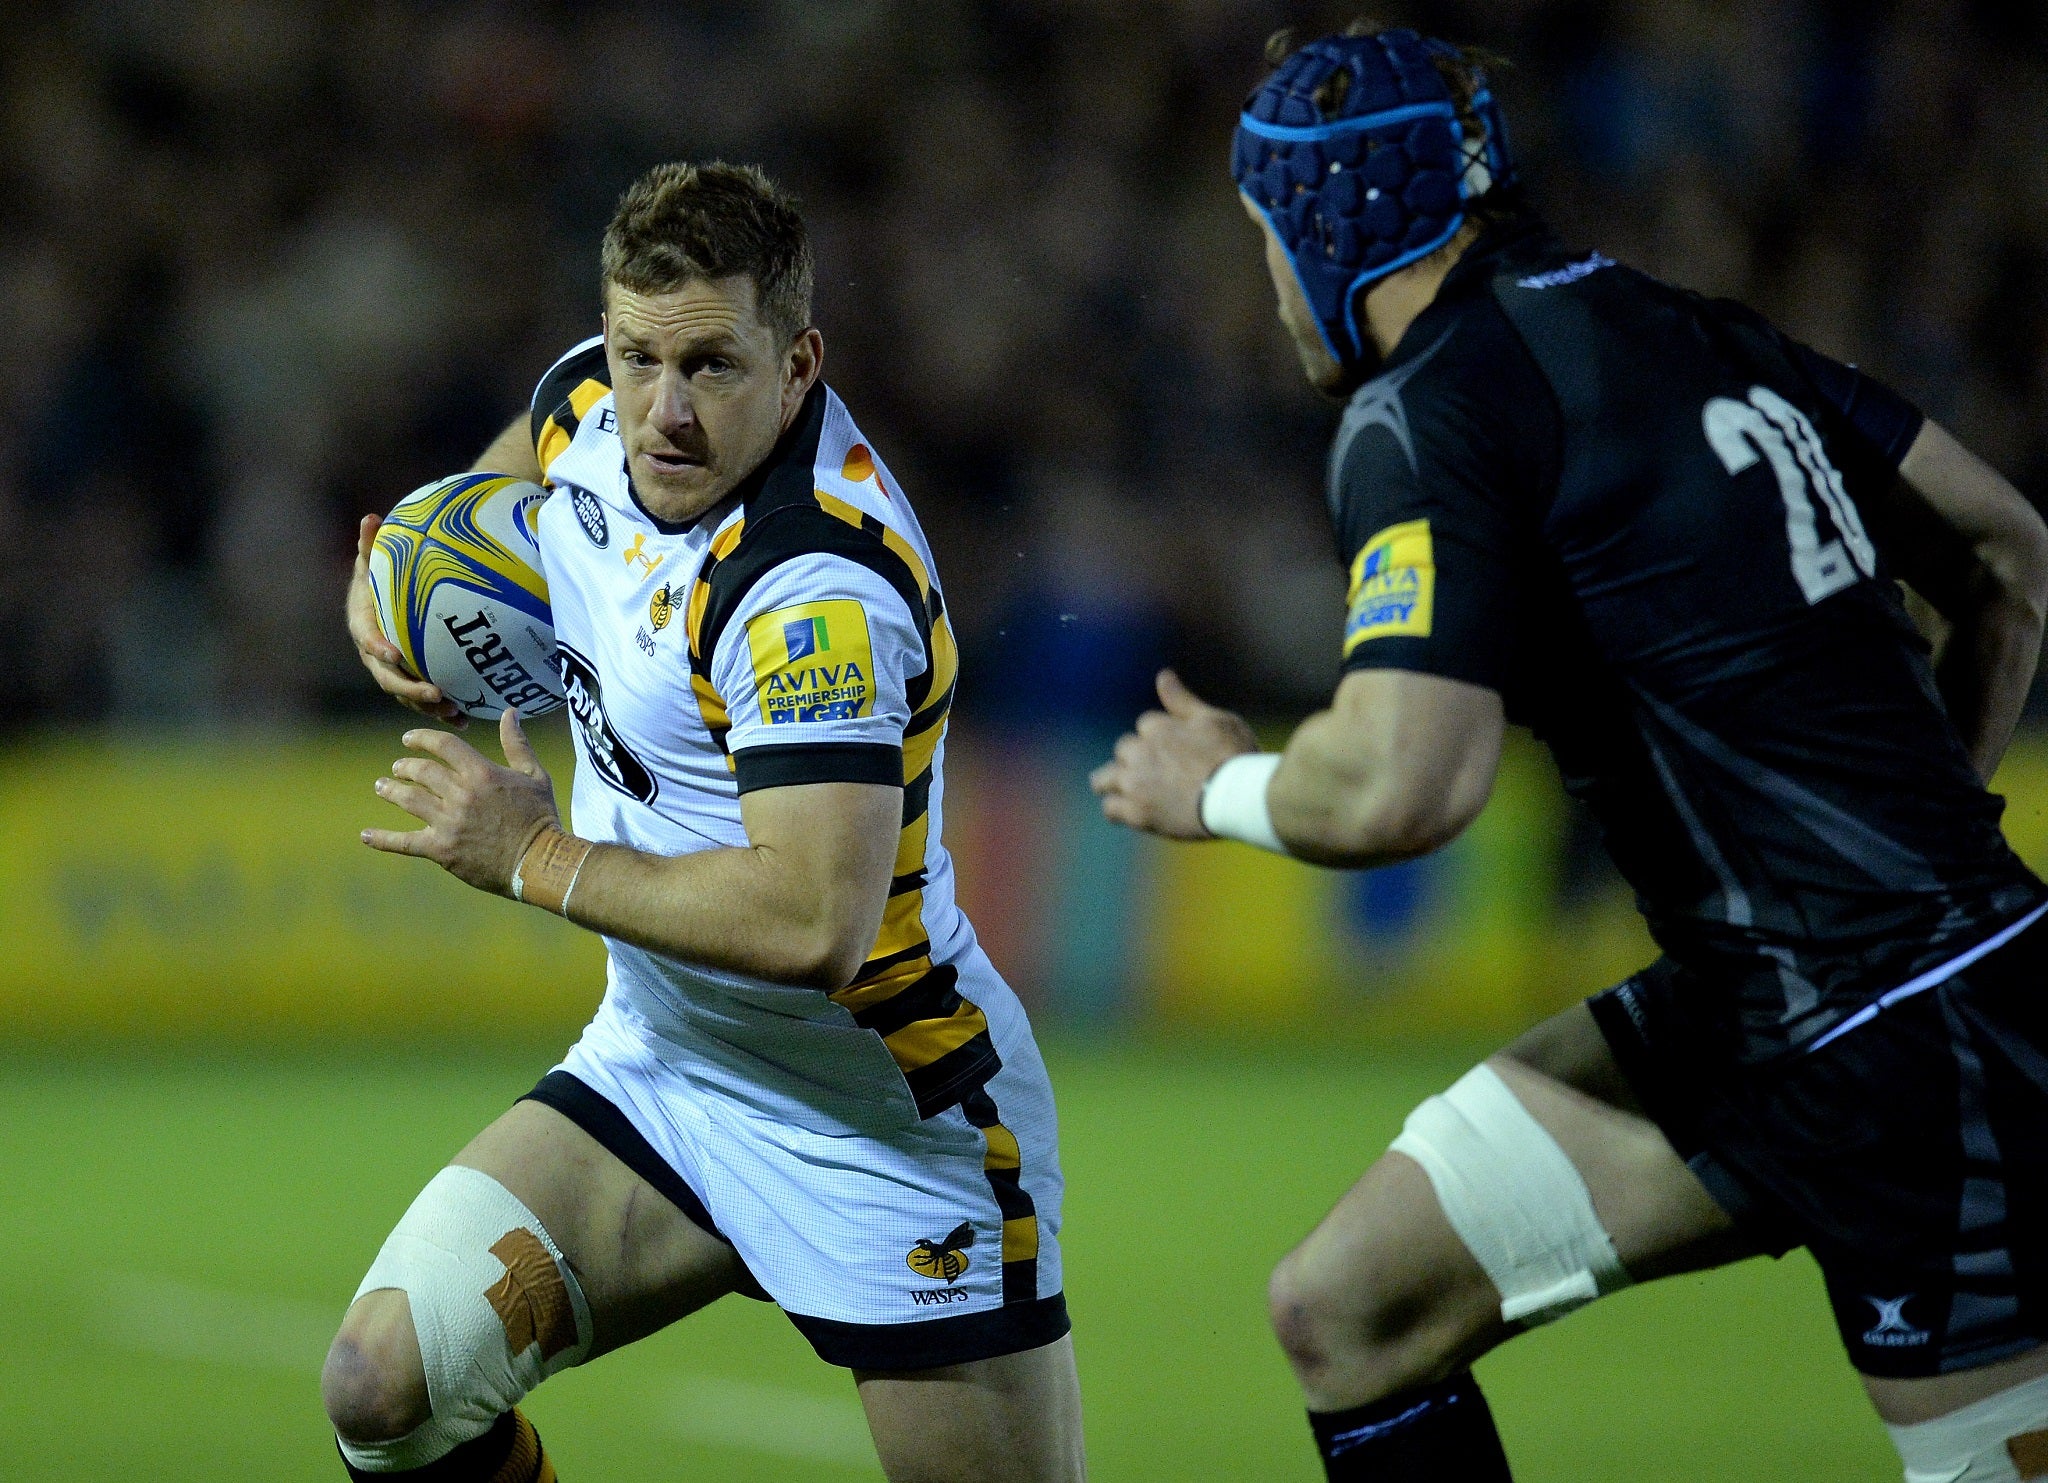 Gopperth came off the bench to clinch victory for Wasps